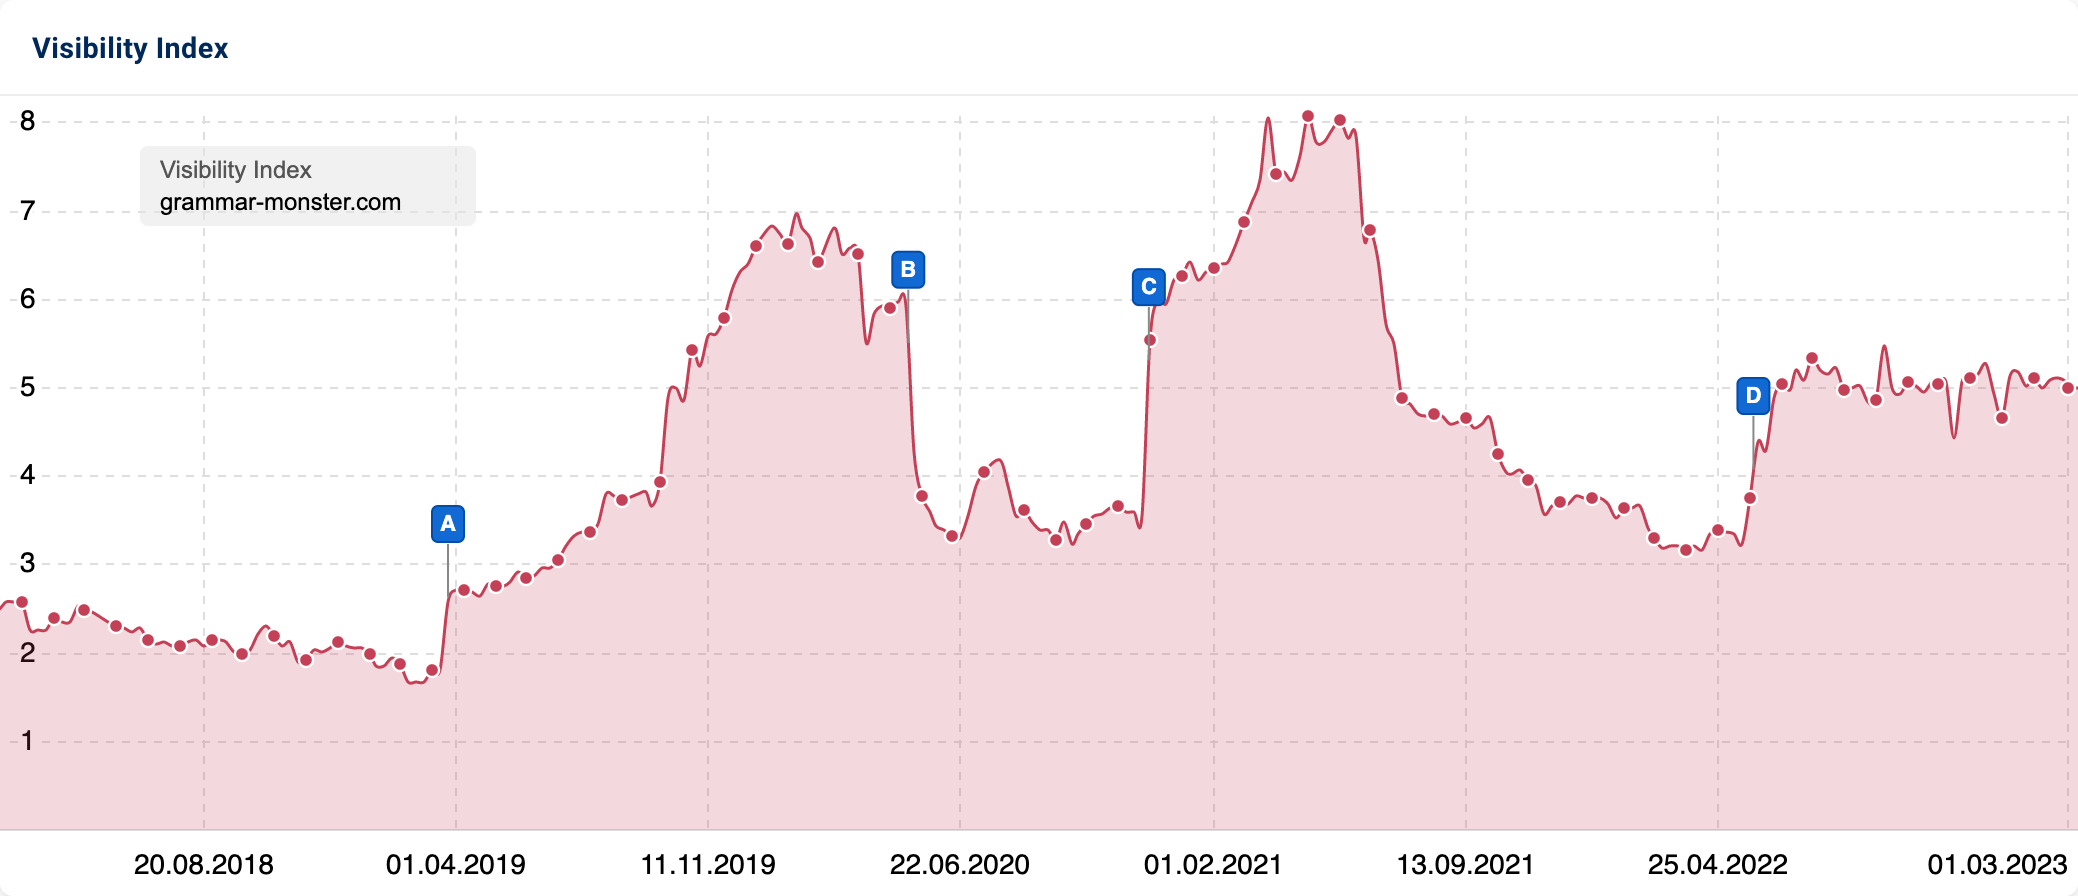 Visibility trend for the mobile value of the domain grammar-monster.com since the beginning of 2018. The Visibility fluctuates between about 2.5 points and about 8 points. Furthermore, four blue event pins can be seen at different date points.